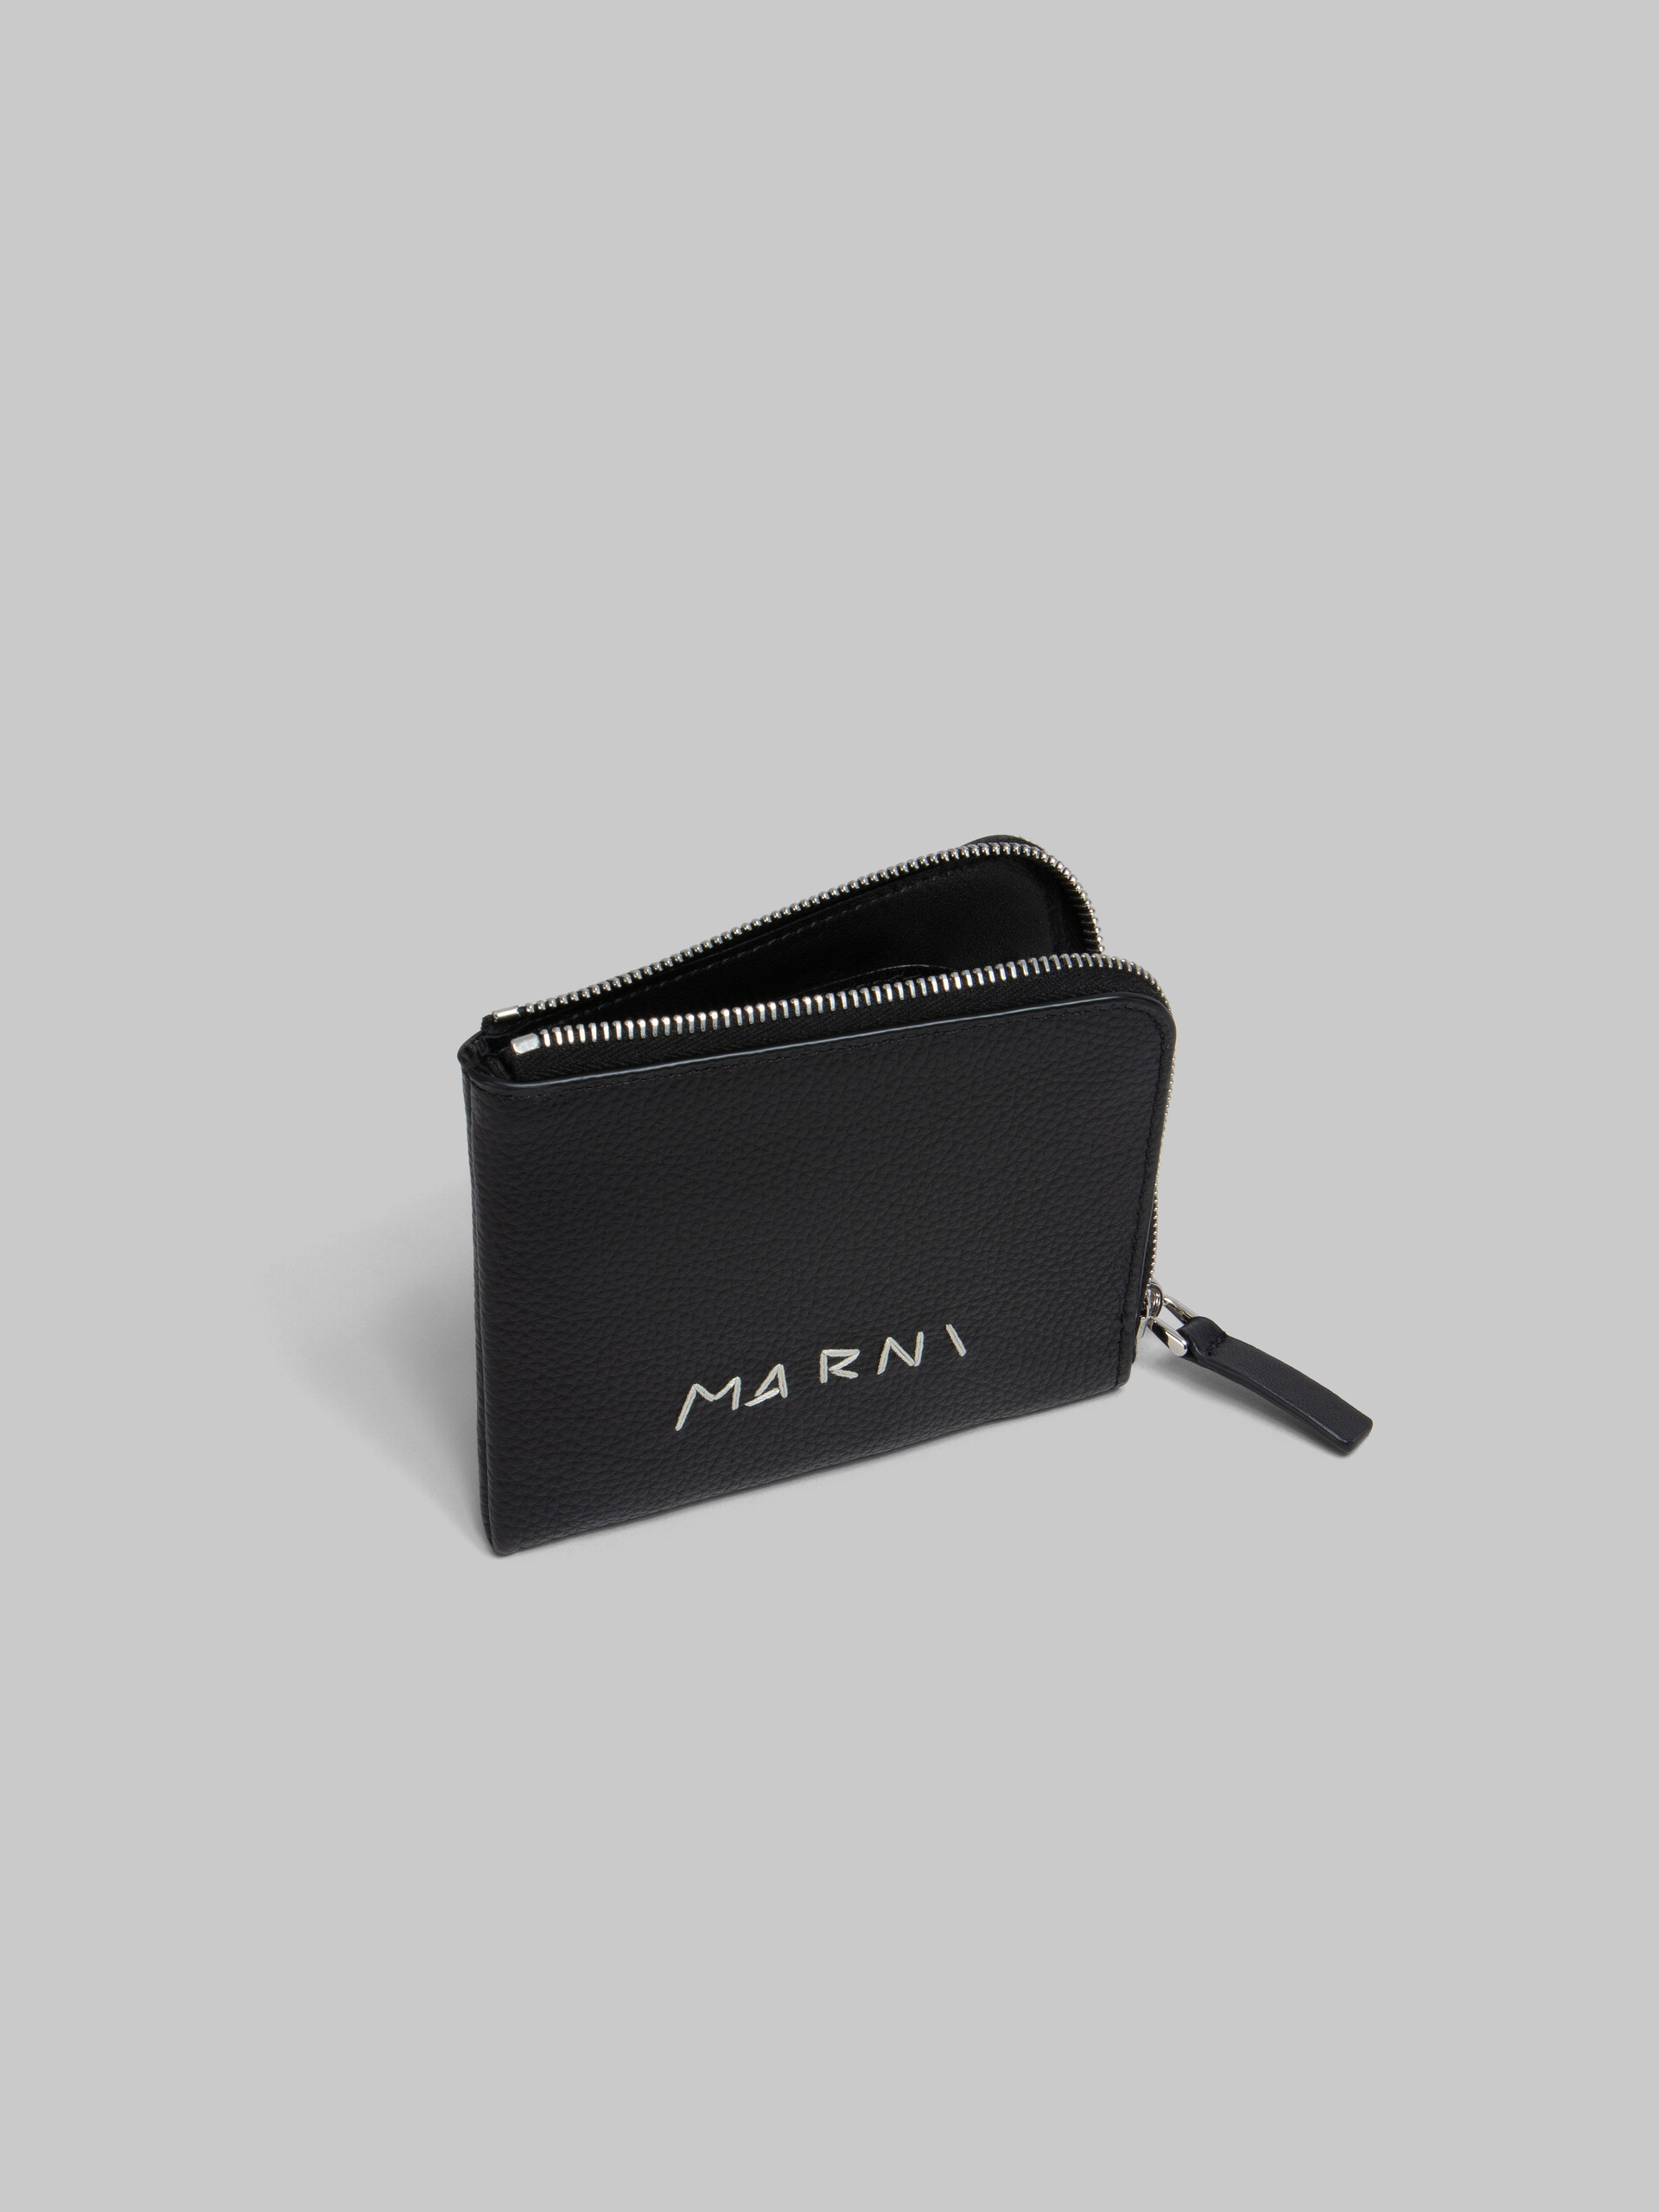 Black leather zip-around wallet with Marni mending - Wallets - Image 2